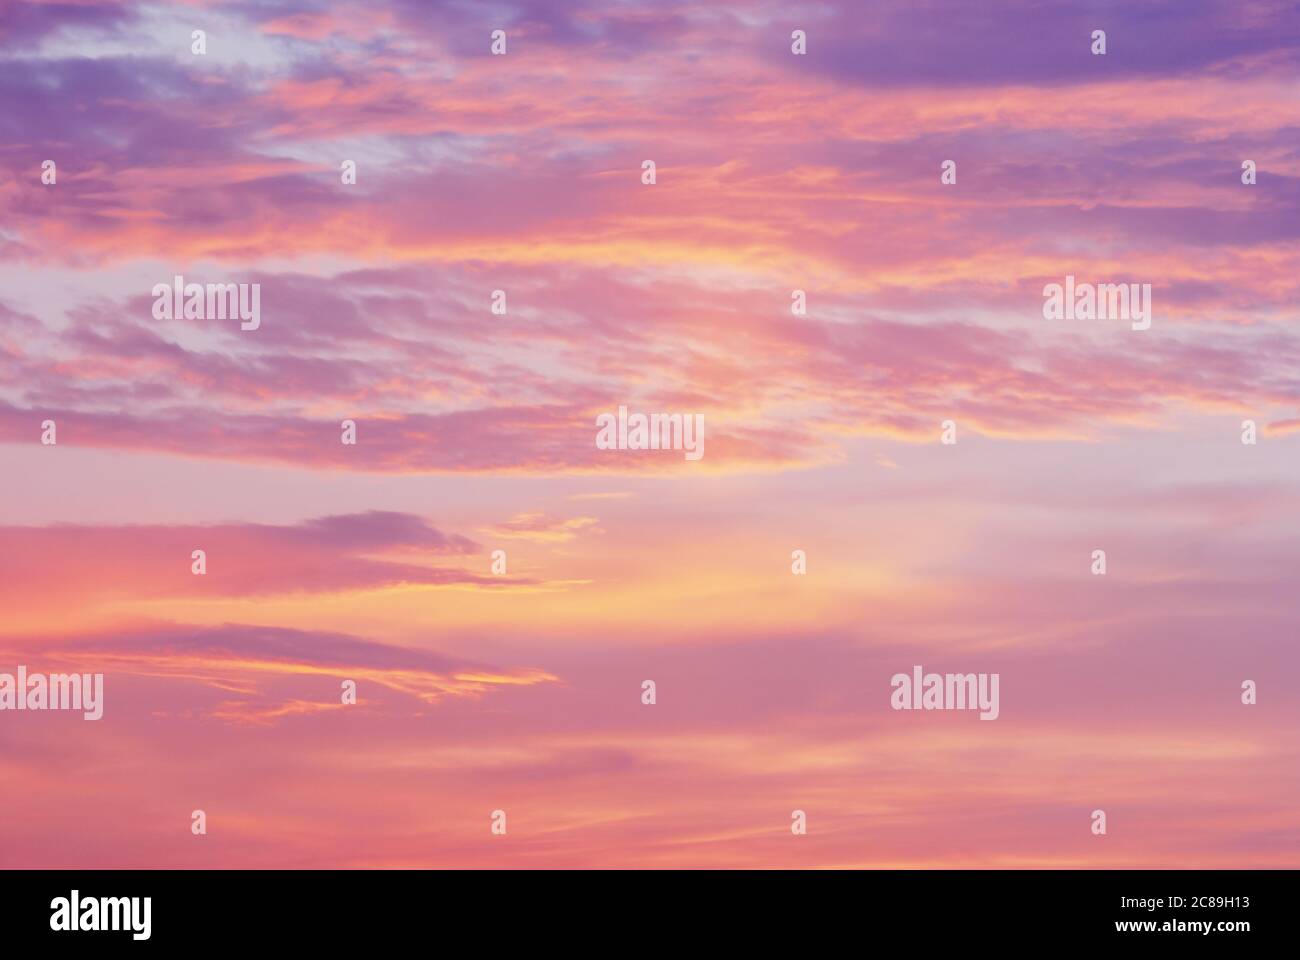 pink purple orange clouds in sunset sky, blurry natural dawn sky background Stock Photo